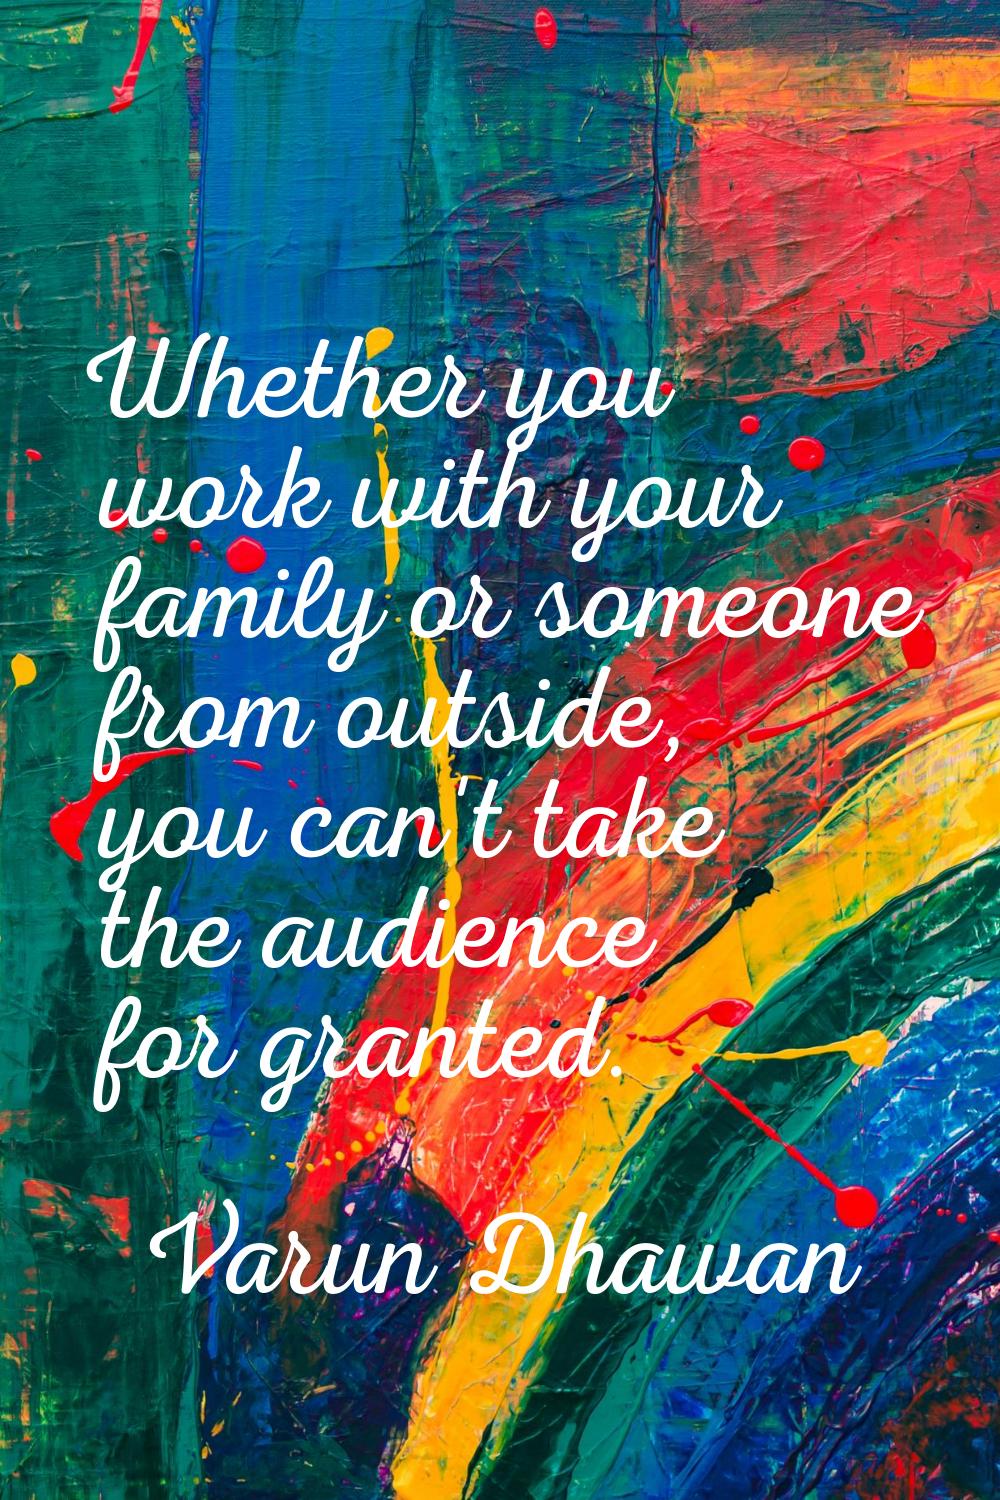 Whether you work with your family or someone from outside, you can't take the audience for granted.